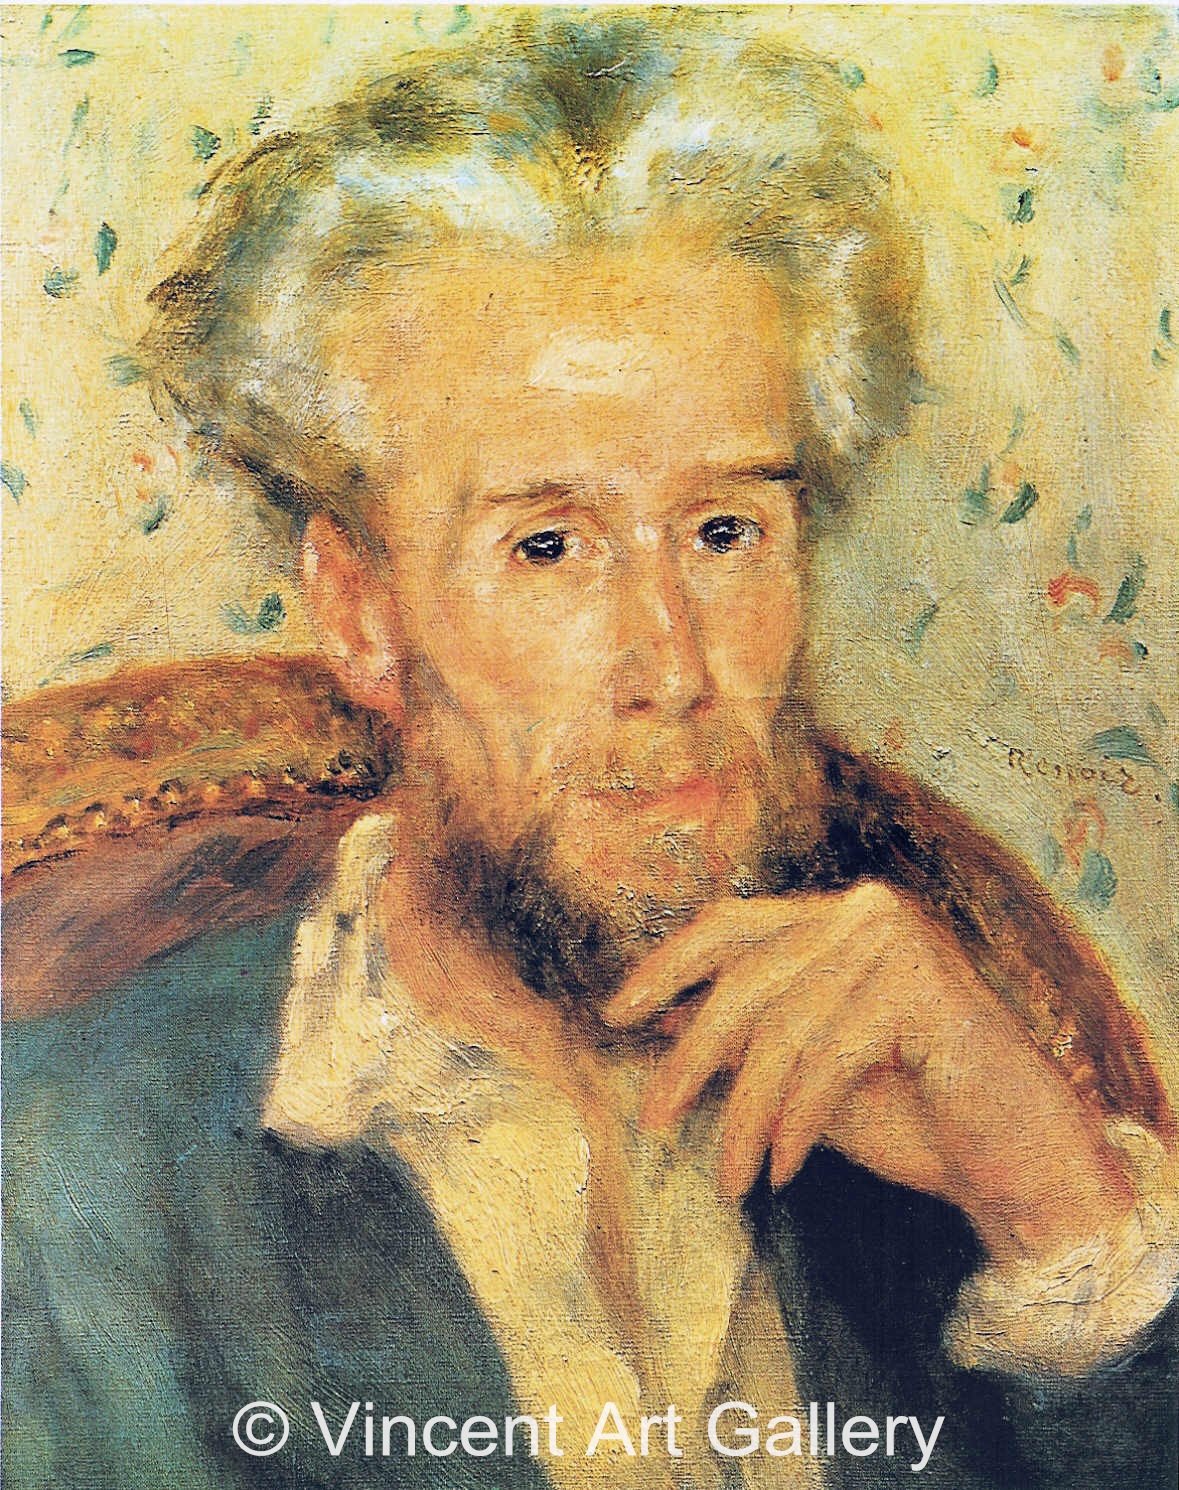 A3032, RENOIR, Portrait of Victor Choquet with a White Background